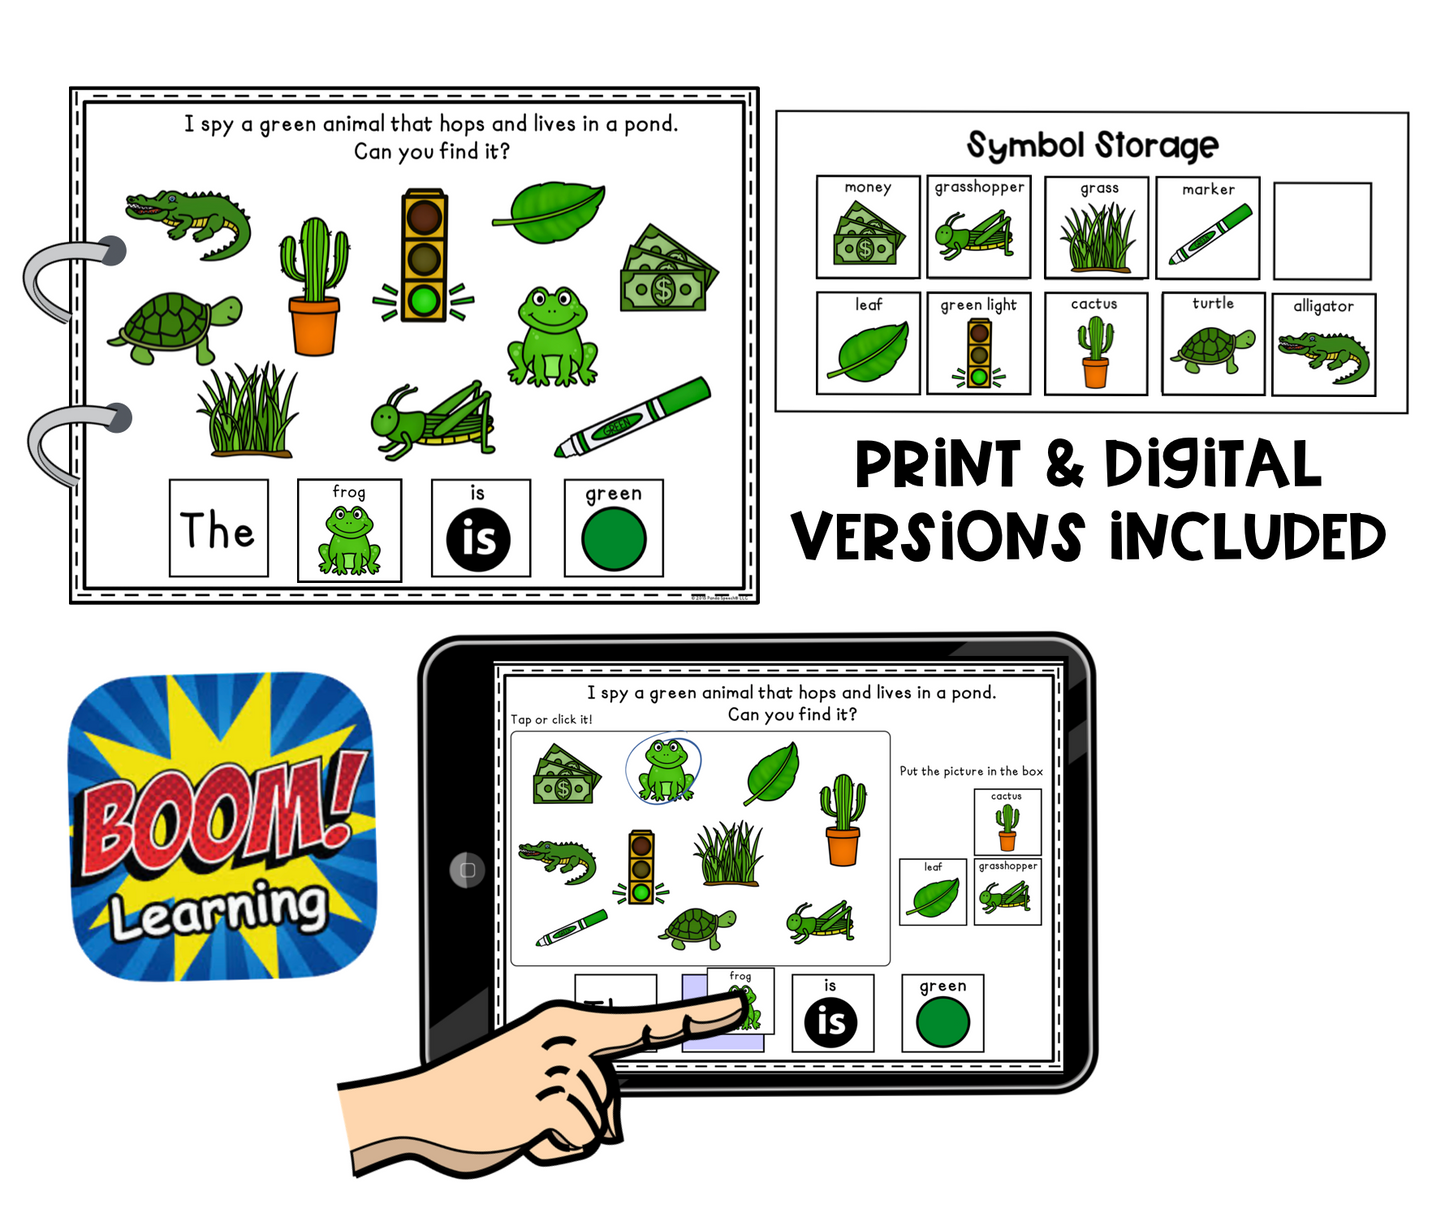 I Spy GREEN Things! Color Series Print & Make Books (includes a digital BOOM Card book)